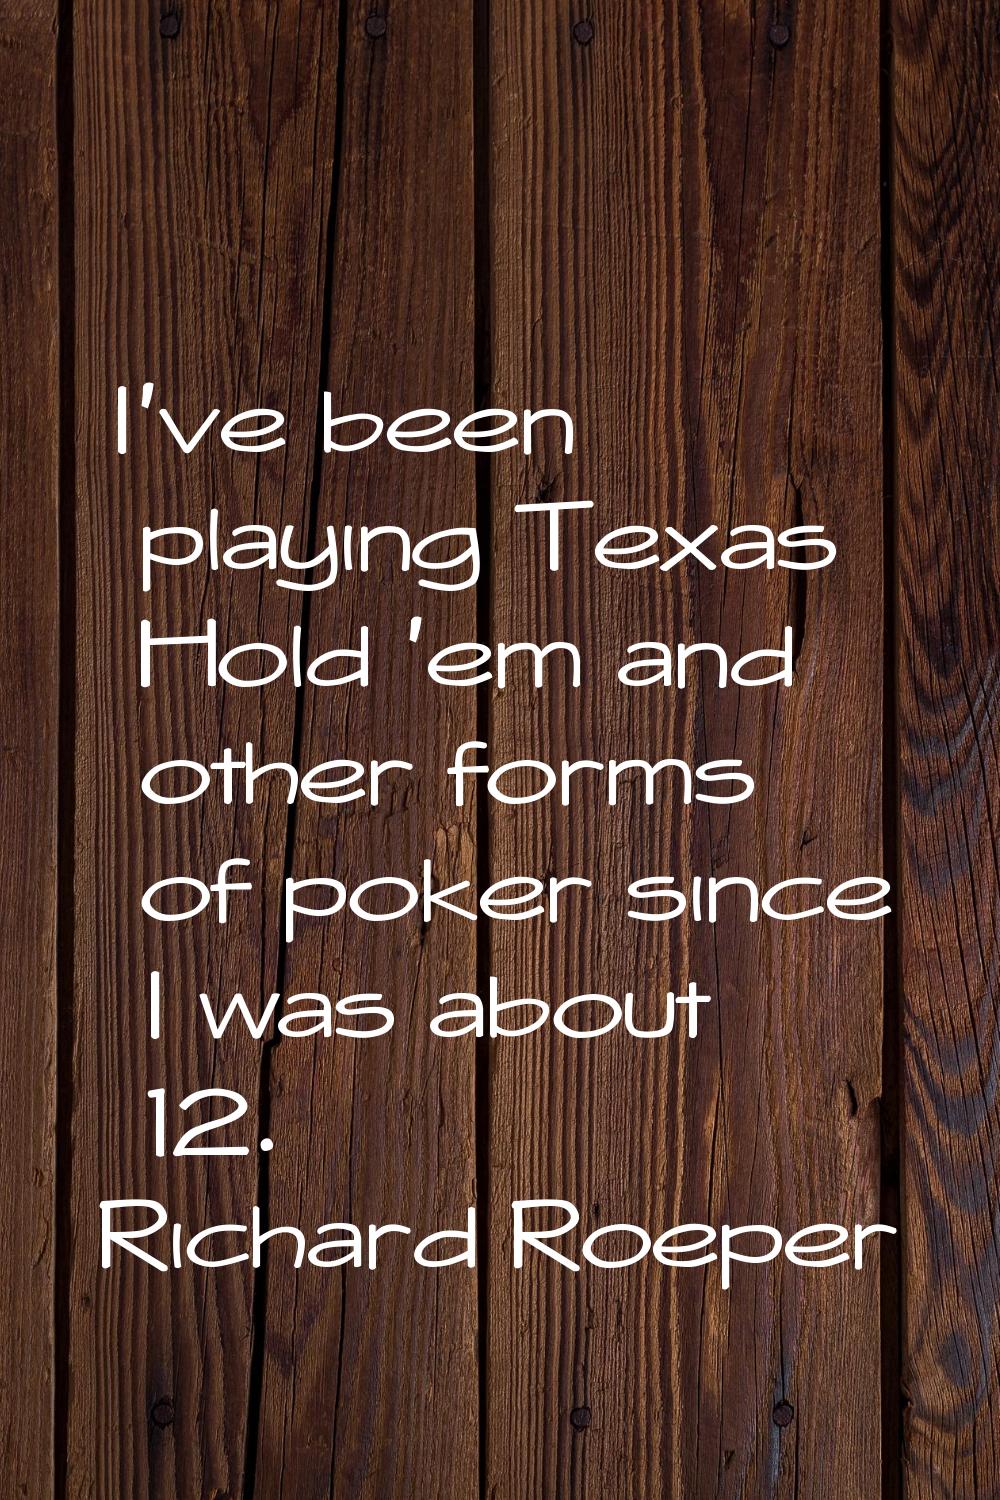 I've been playing Texas Hold 'em and other forms of poker since I was about 12.